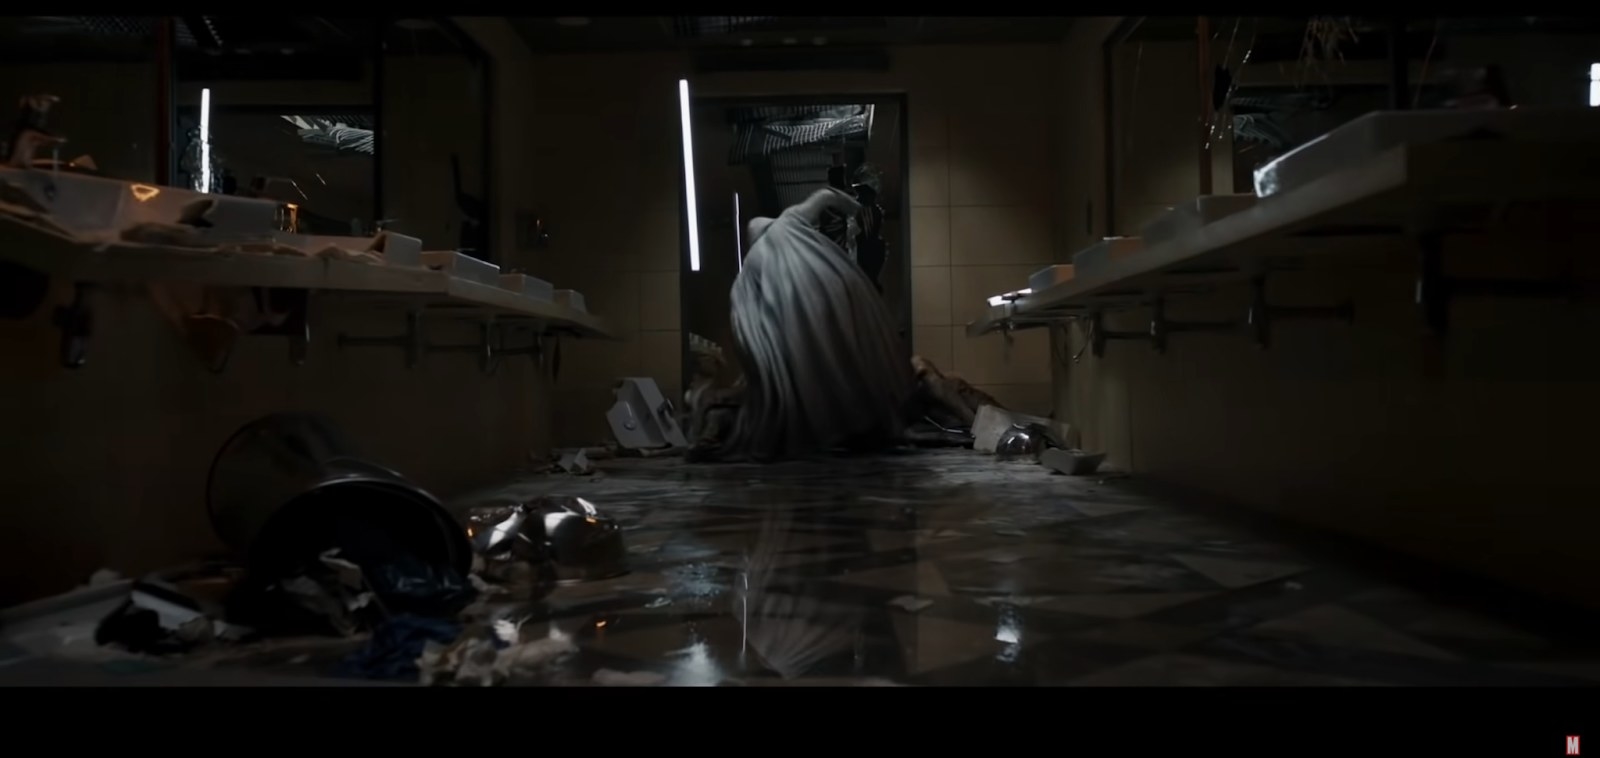 Moon Knight standing above a person lying on the floor, appearing to hit them